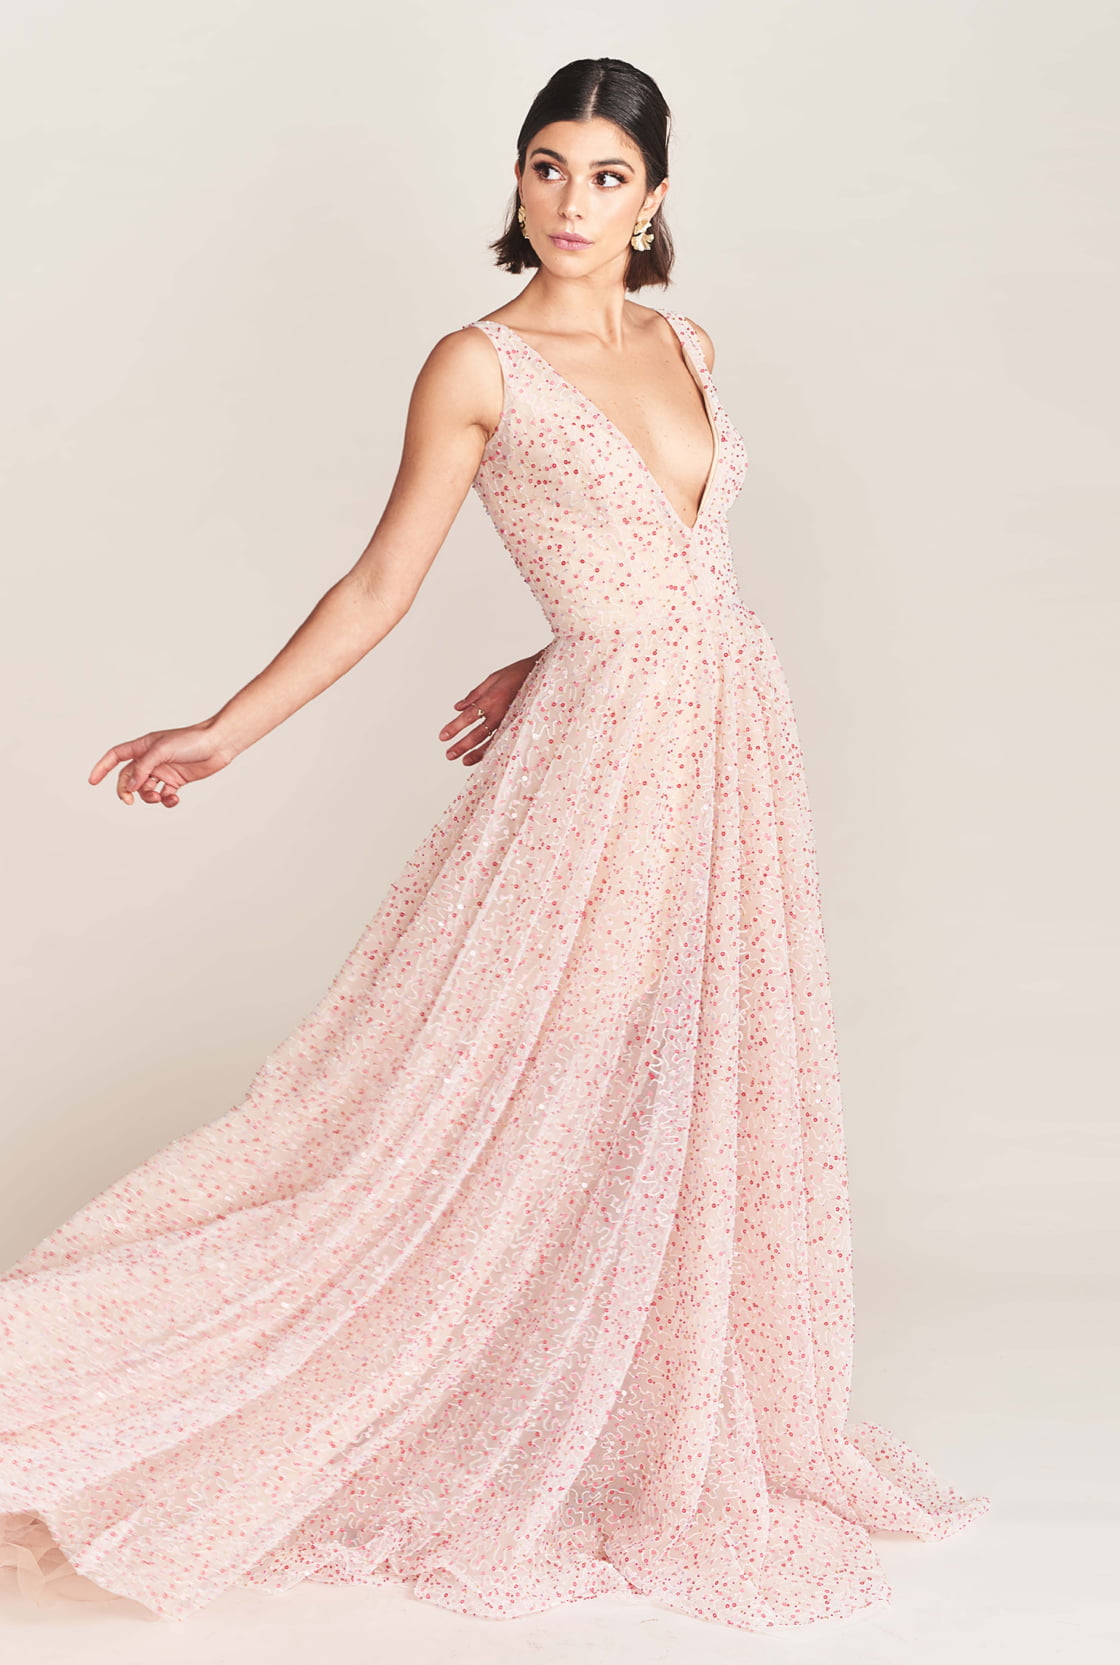 Champagne Blush Lace Plus Size Wedding Dress With Long Sleeves, Appliqued V  Neck, And Corset Up Back For Church Marriage 2021 Plus Size Wedding Gowns  Style No. Dresse263i From Jiekk, $160.81 | DHgate.Com